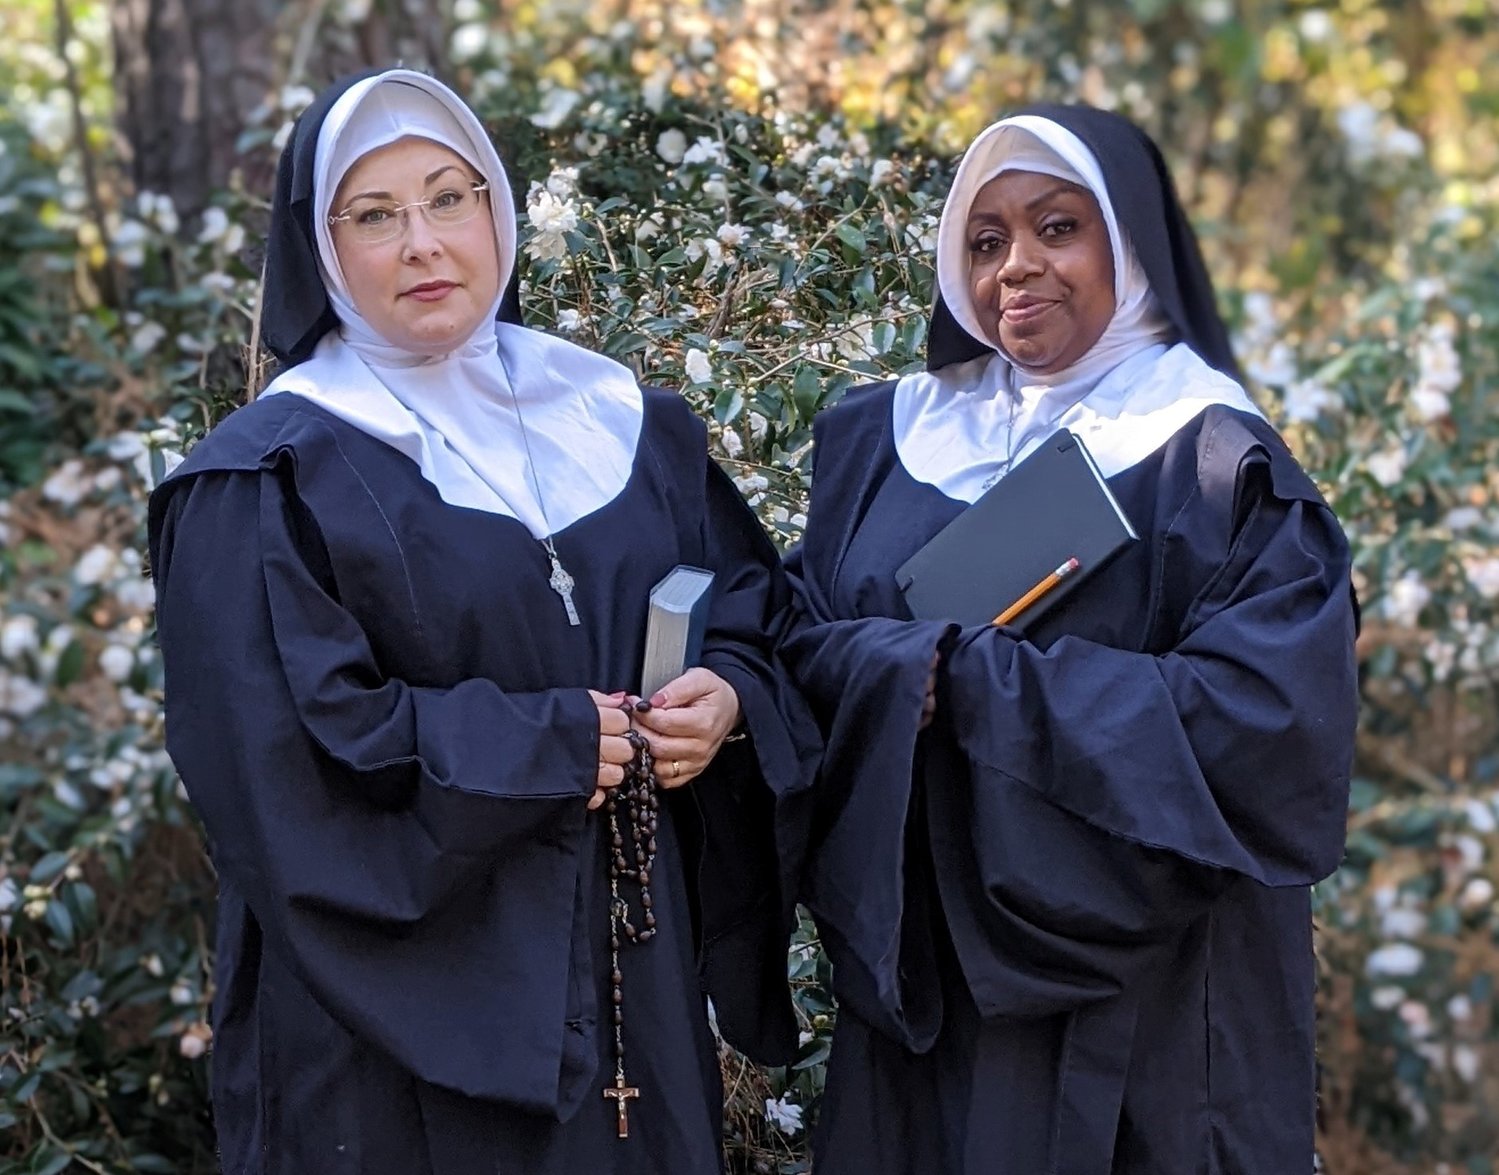 Jennifer Malone plays Sister Sophia and Jackie Hill is Sister Berthe in the Gilbert Theater production of 'The Sound of Music' through Dec. 18.